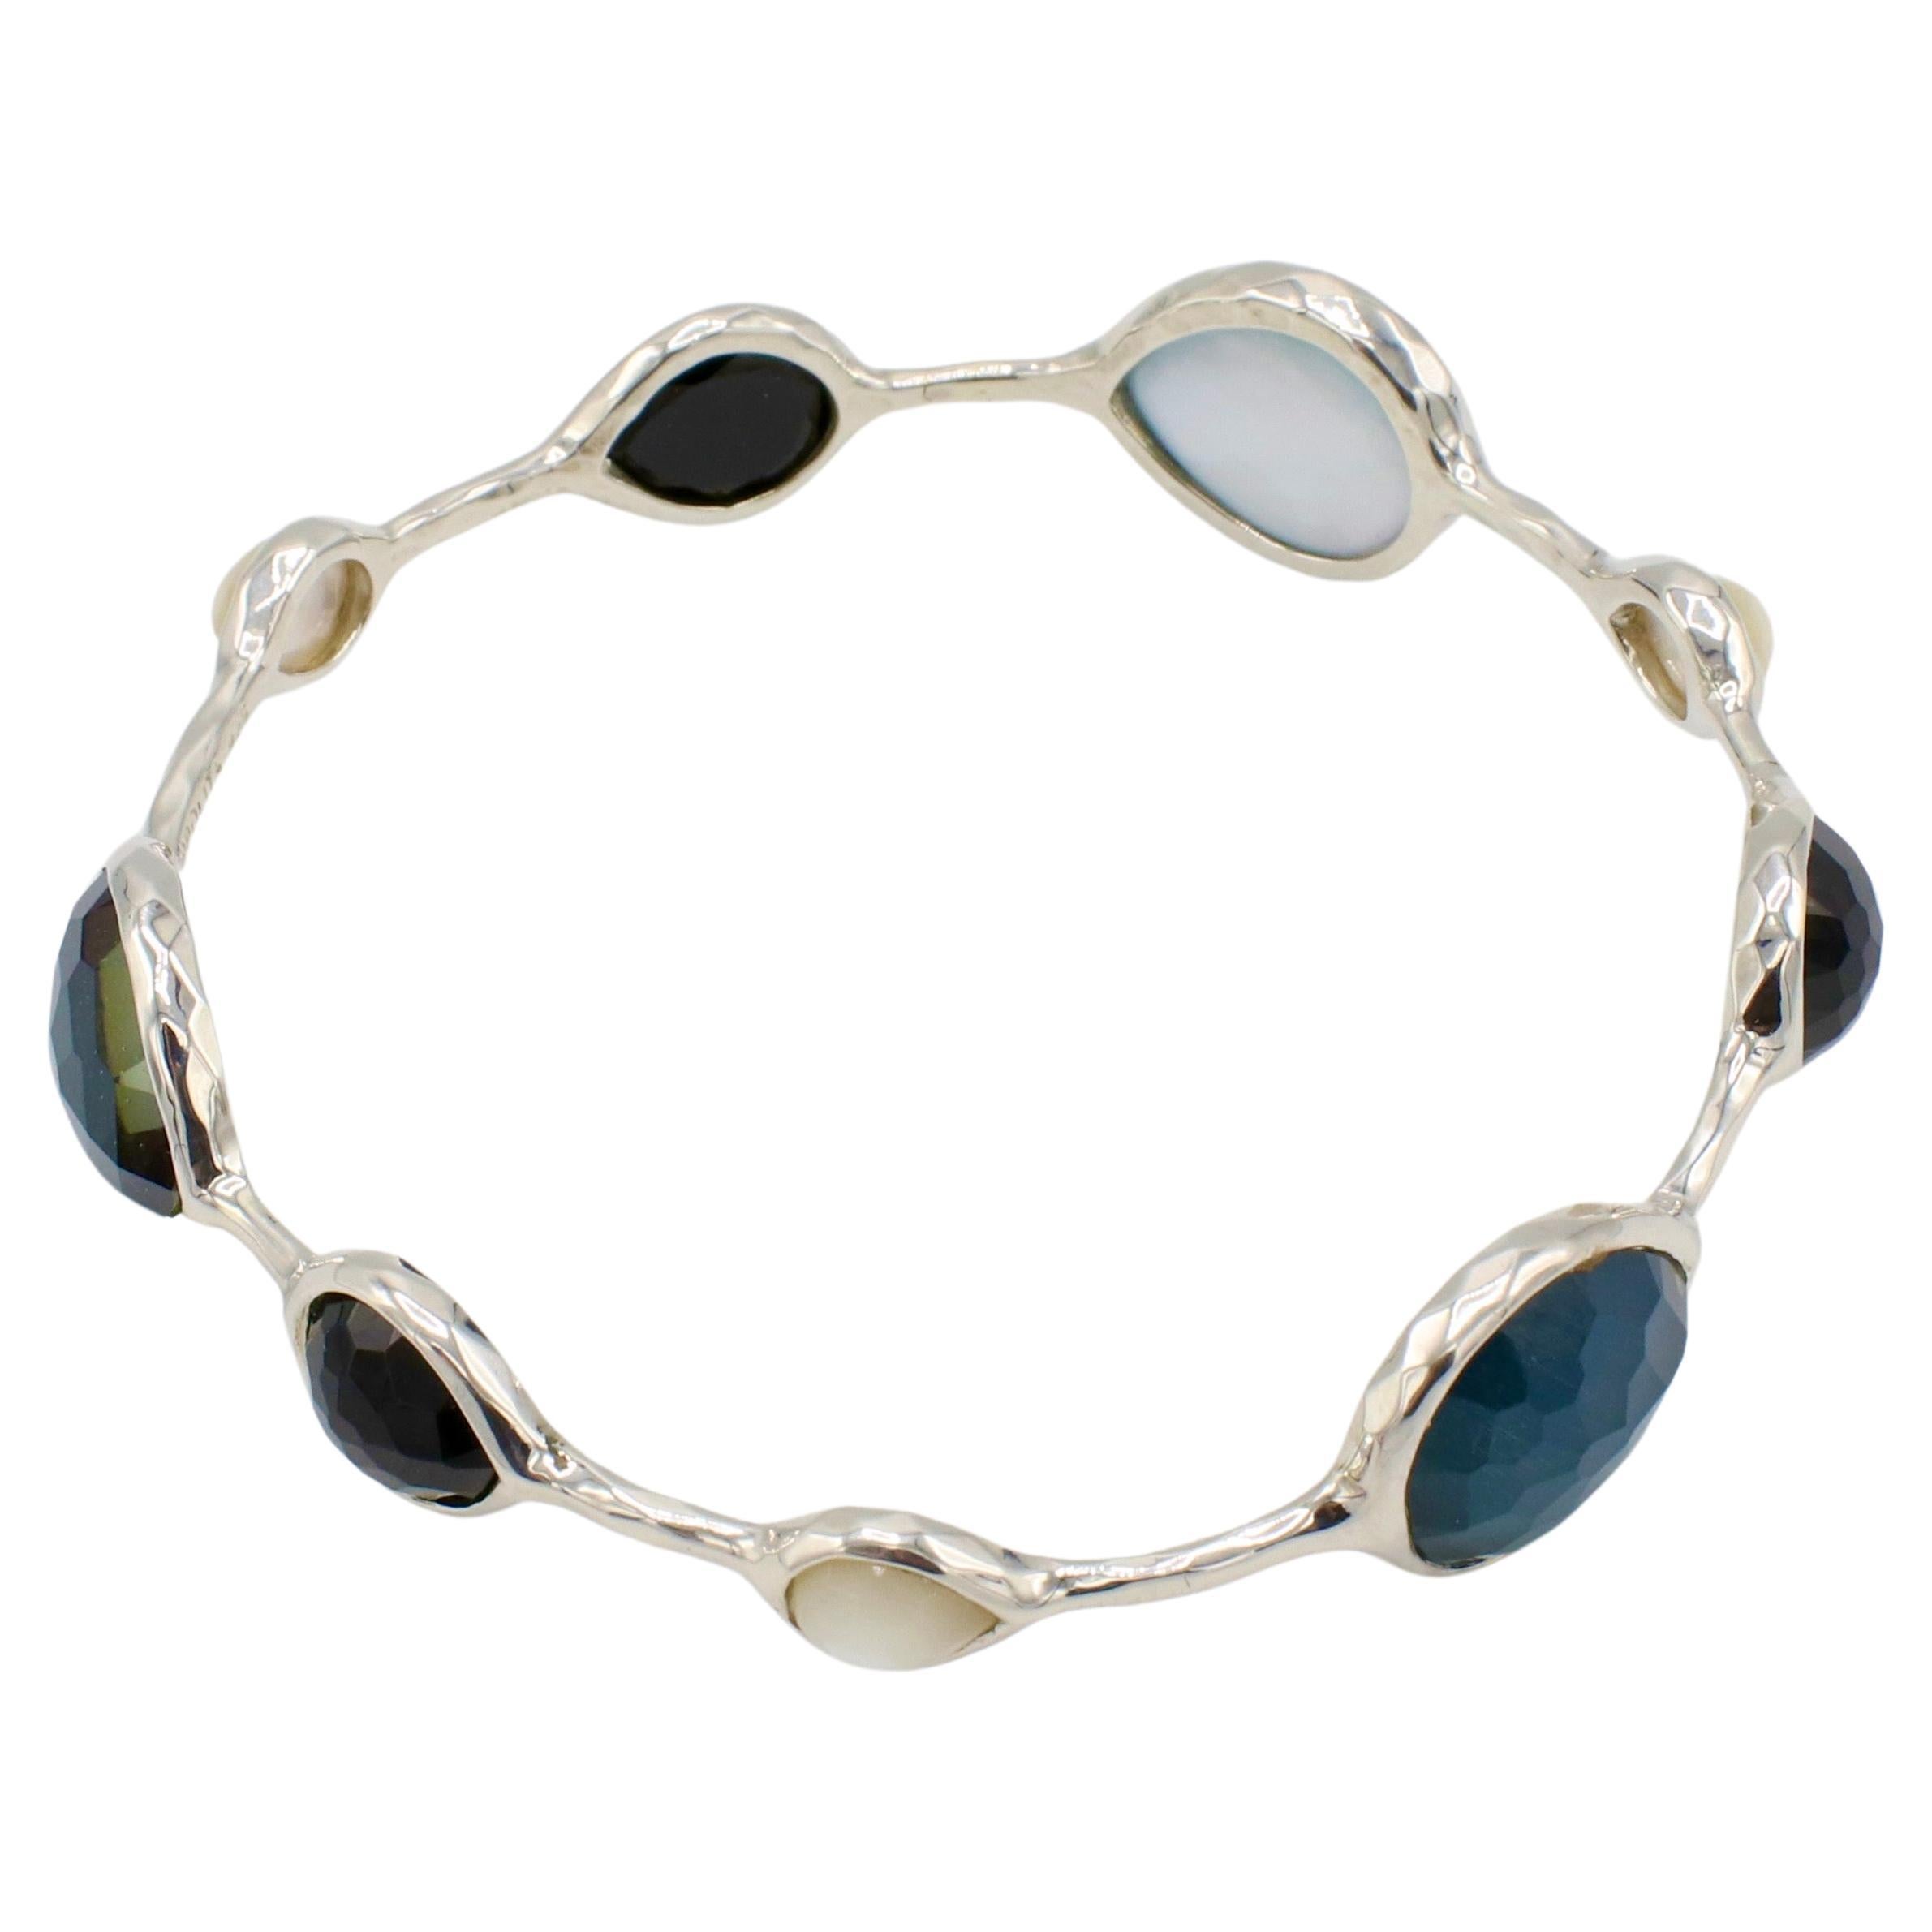 Ippolita Sterling Silver Rock Candy Gemstone Bangle Bracelet 
Metal: Sterling silver
Weight: 13.25 grams
Circumference: 7 inches
Width: 1.5 - 13mm 
Signed: IPPOLITA 925

